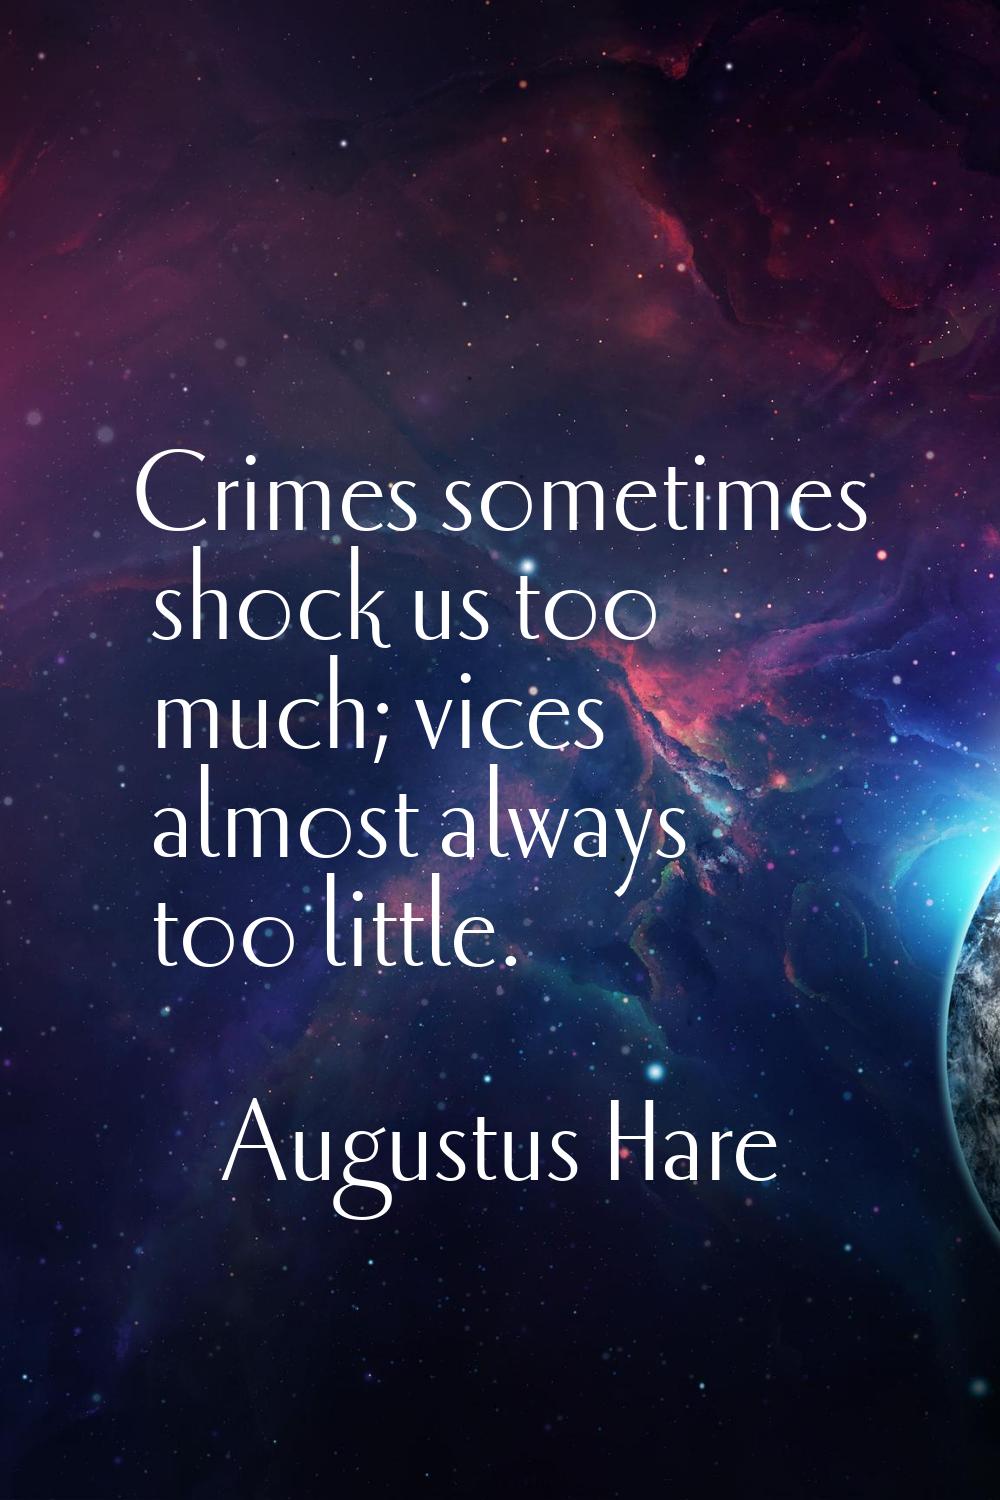 Crimes sometimes shock us too much; vices almost always too little.